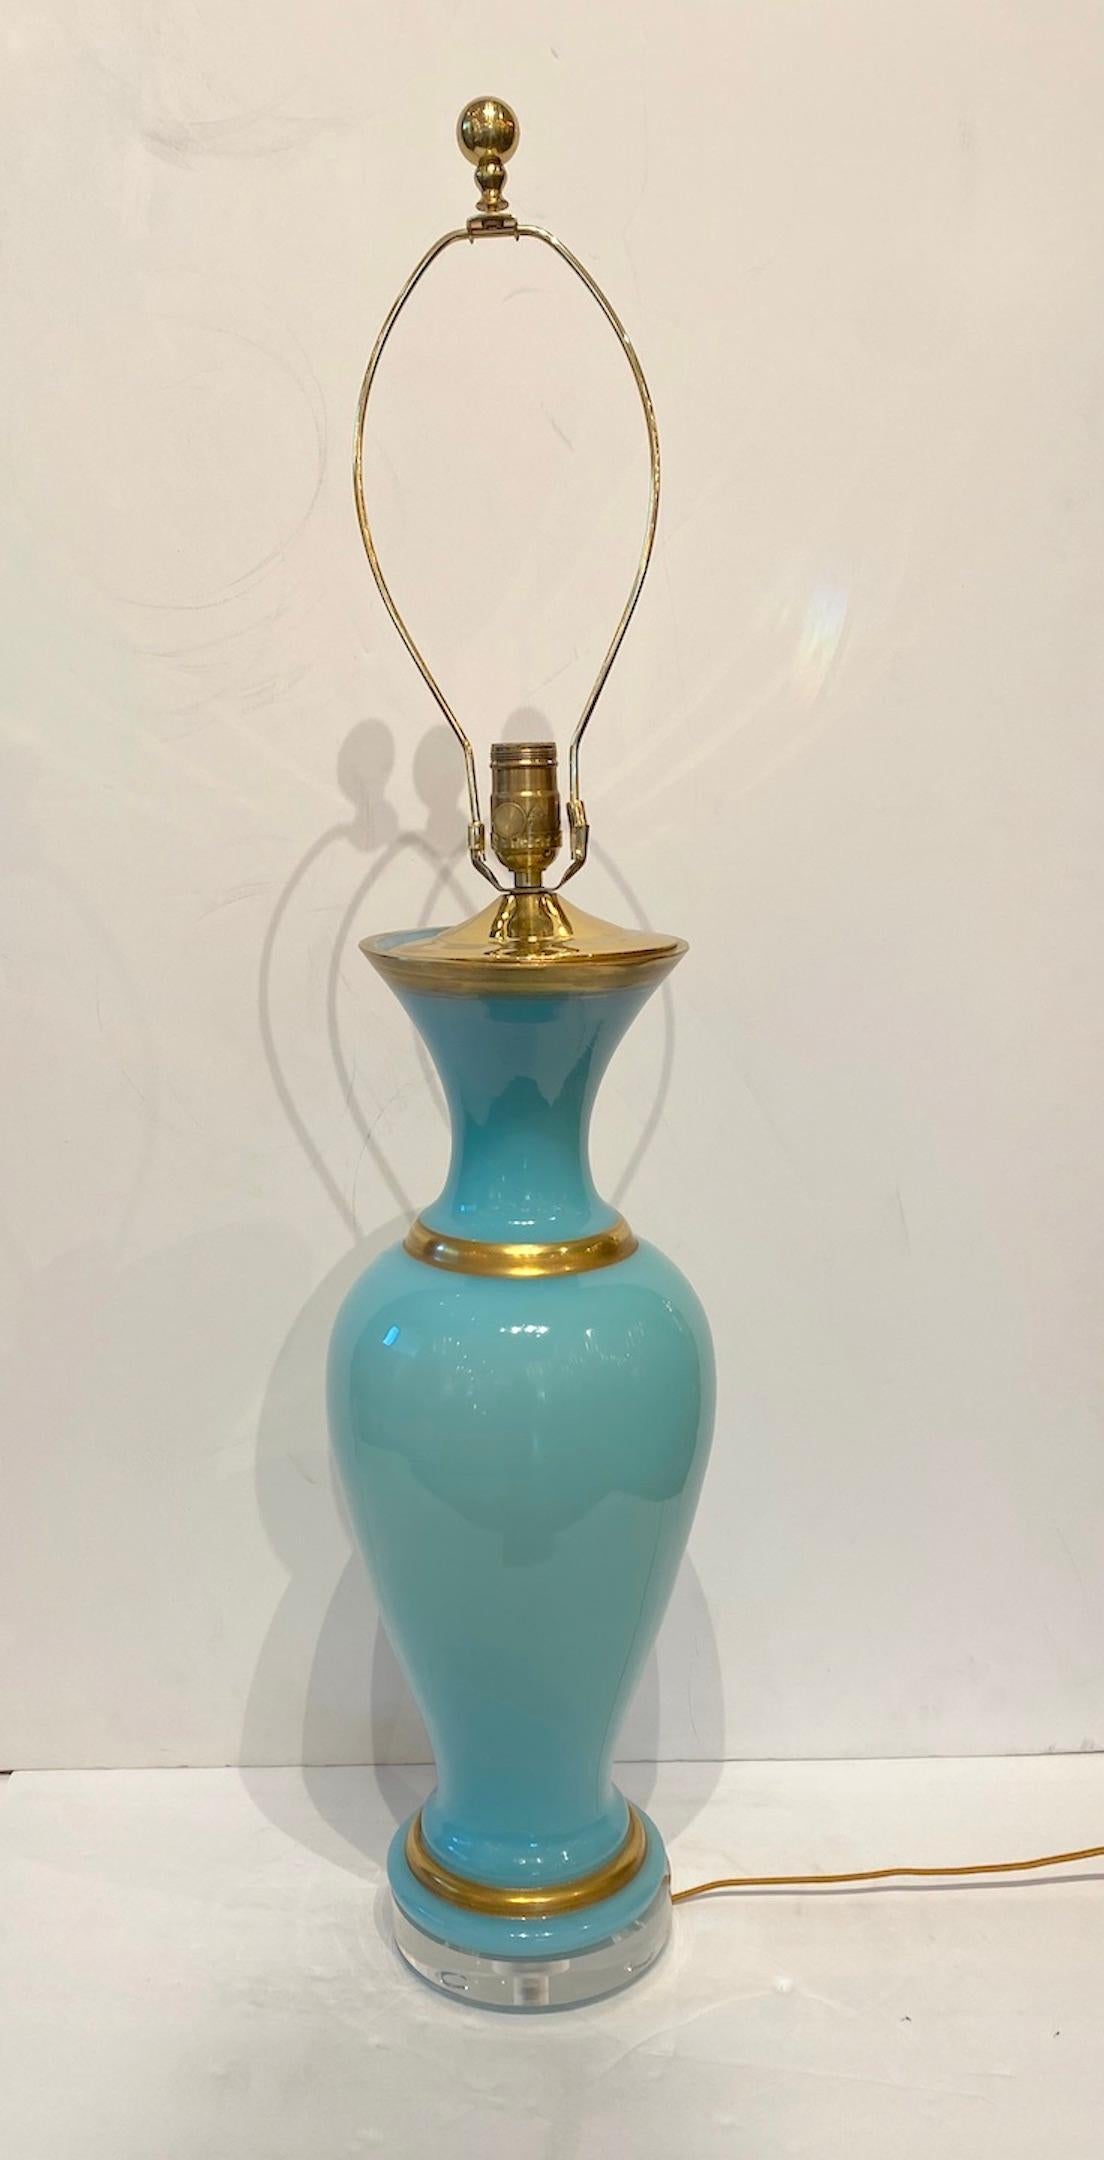 Beautiful pale aqua french opaline vase banded in gold as a lamp. Lucite base. Tan linen shade with trim detail. Wired for USA.